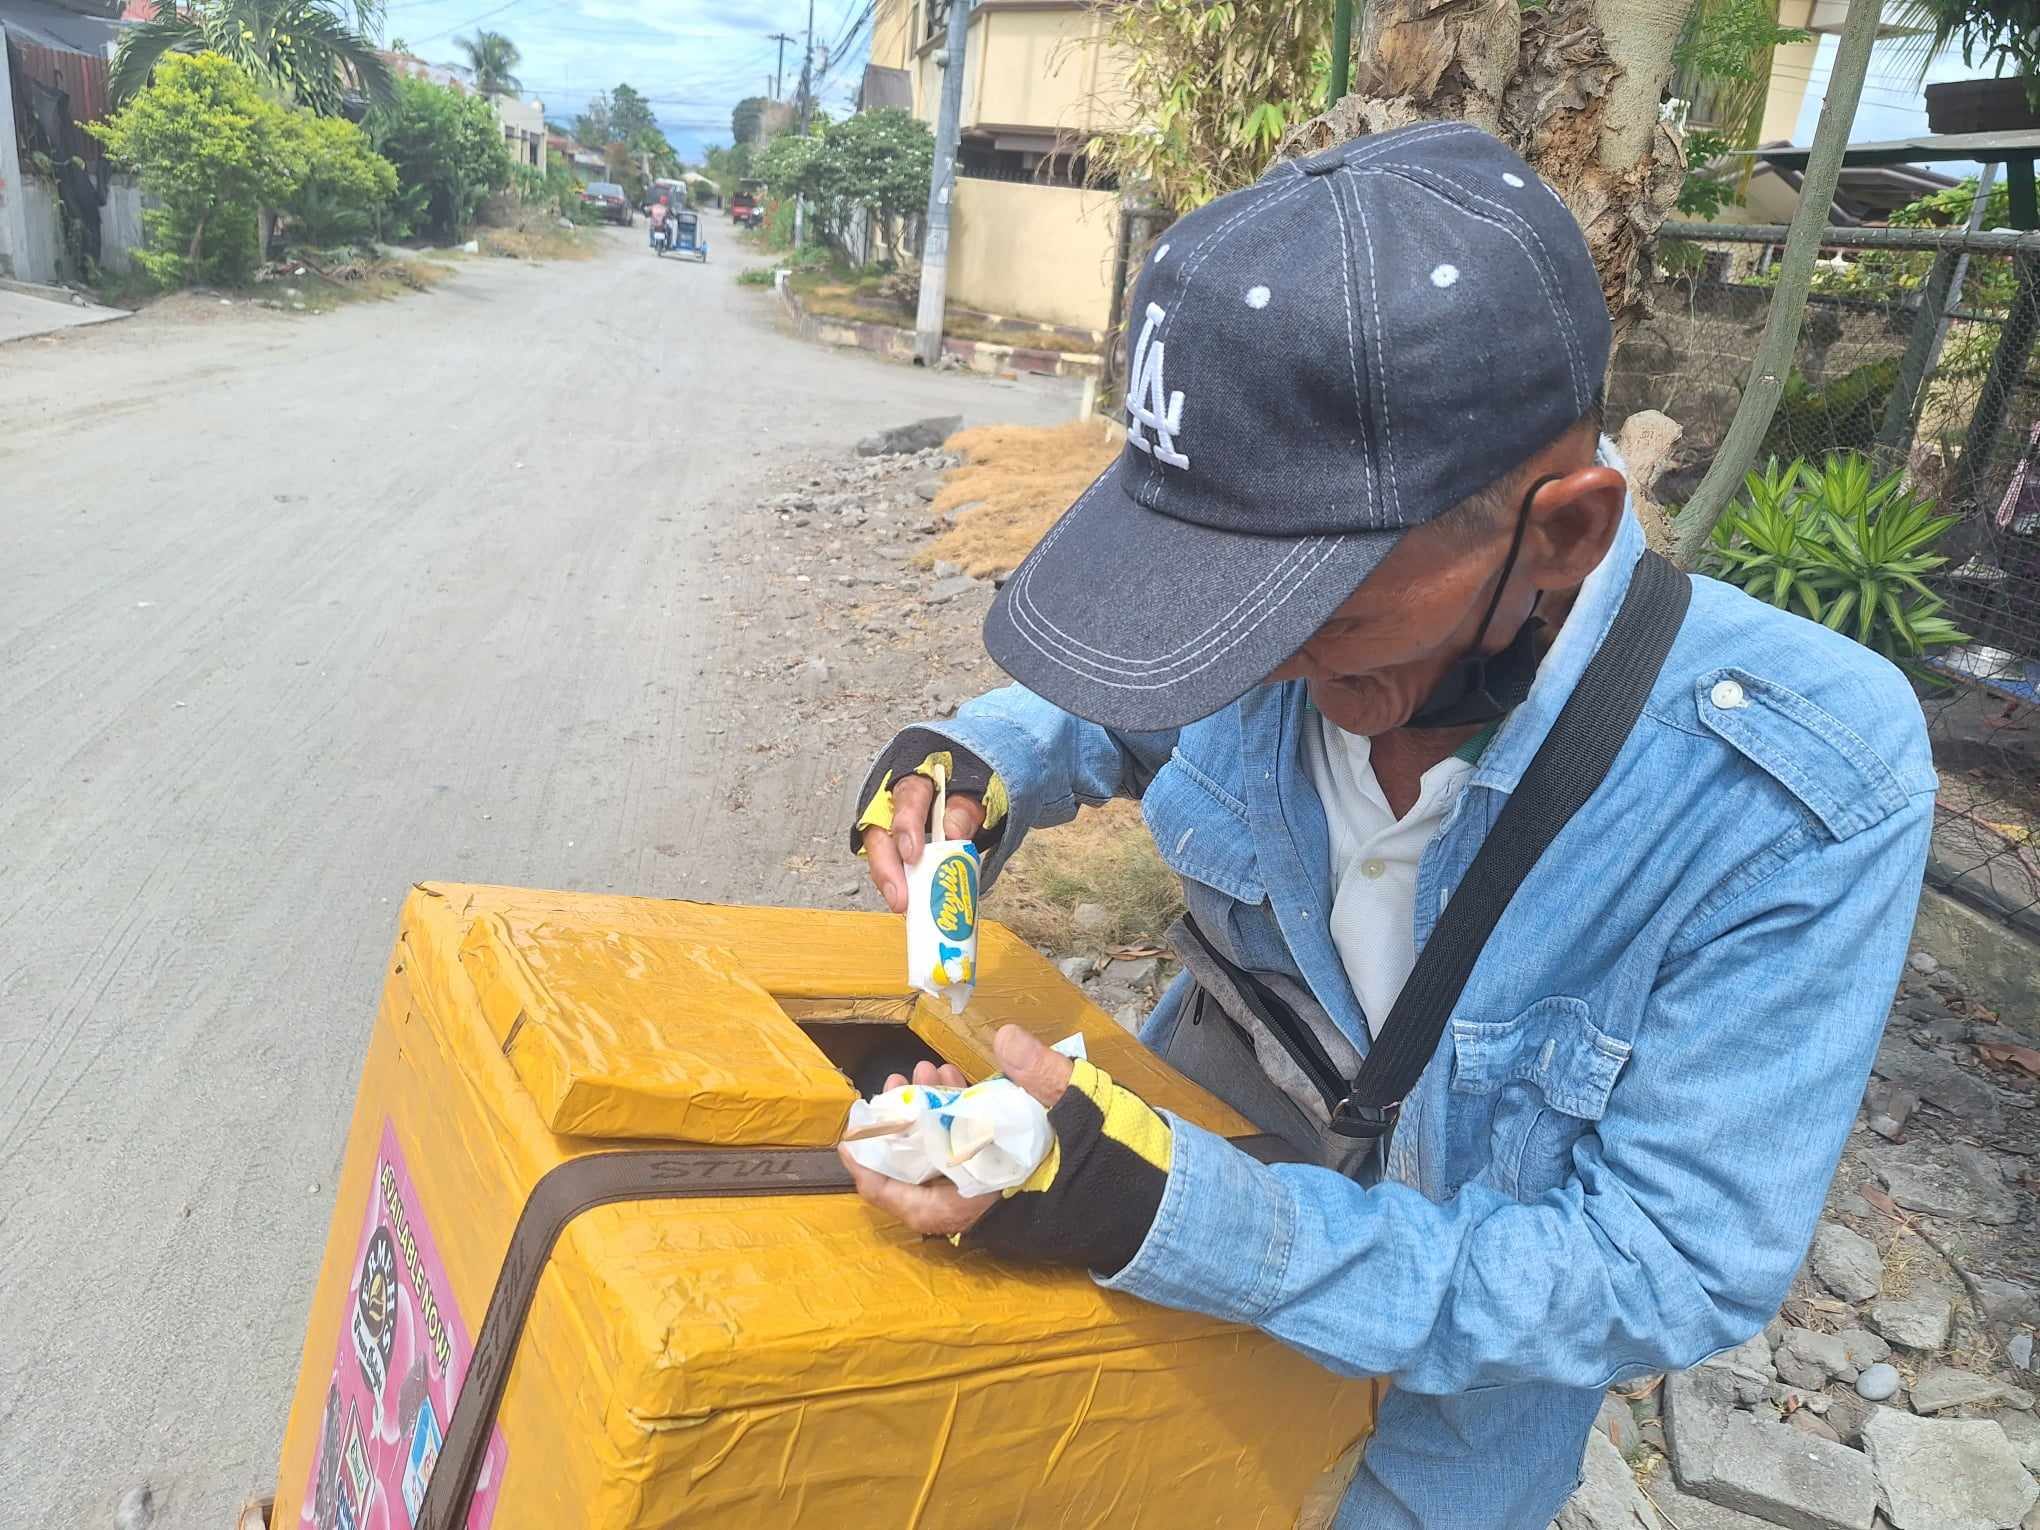 Vendors struggle to work, fight for survival in General Santos’ sun-baked streets